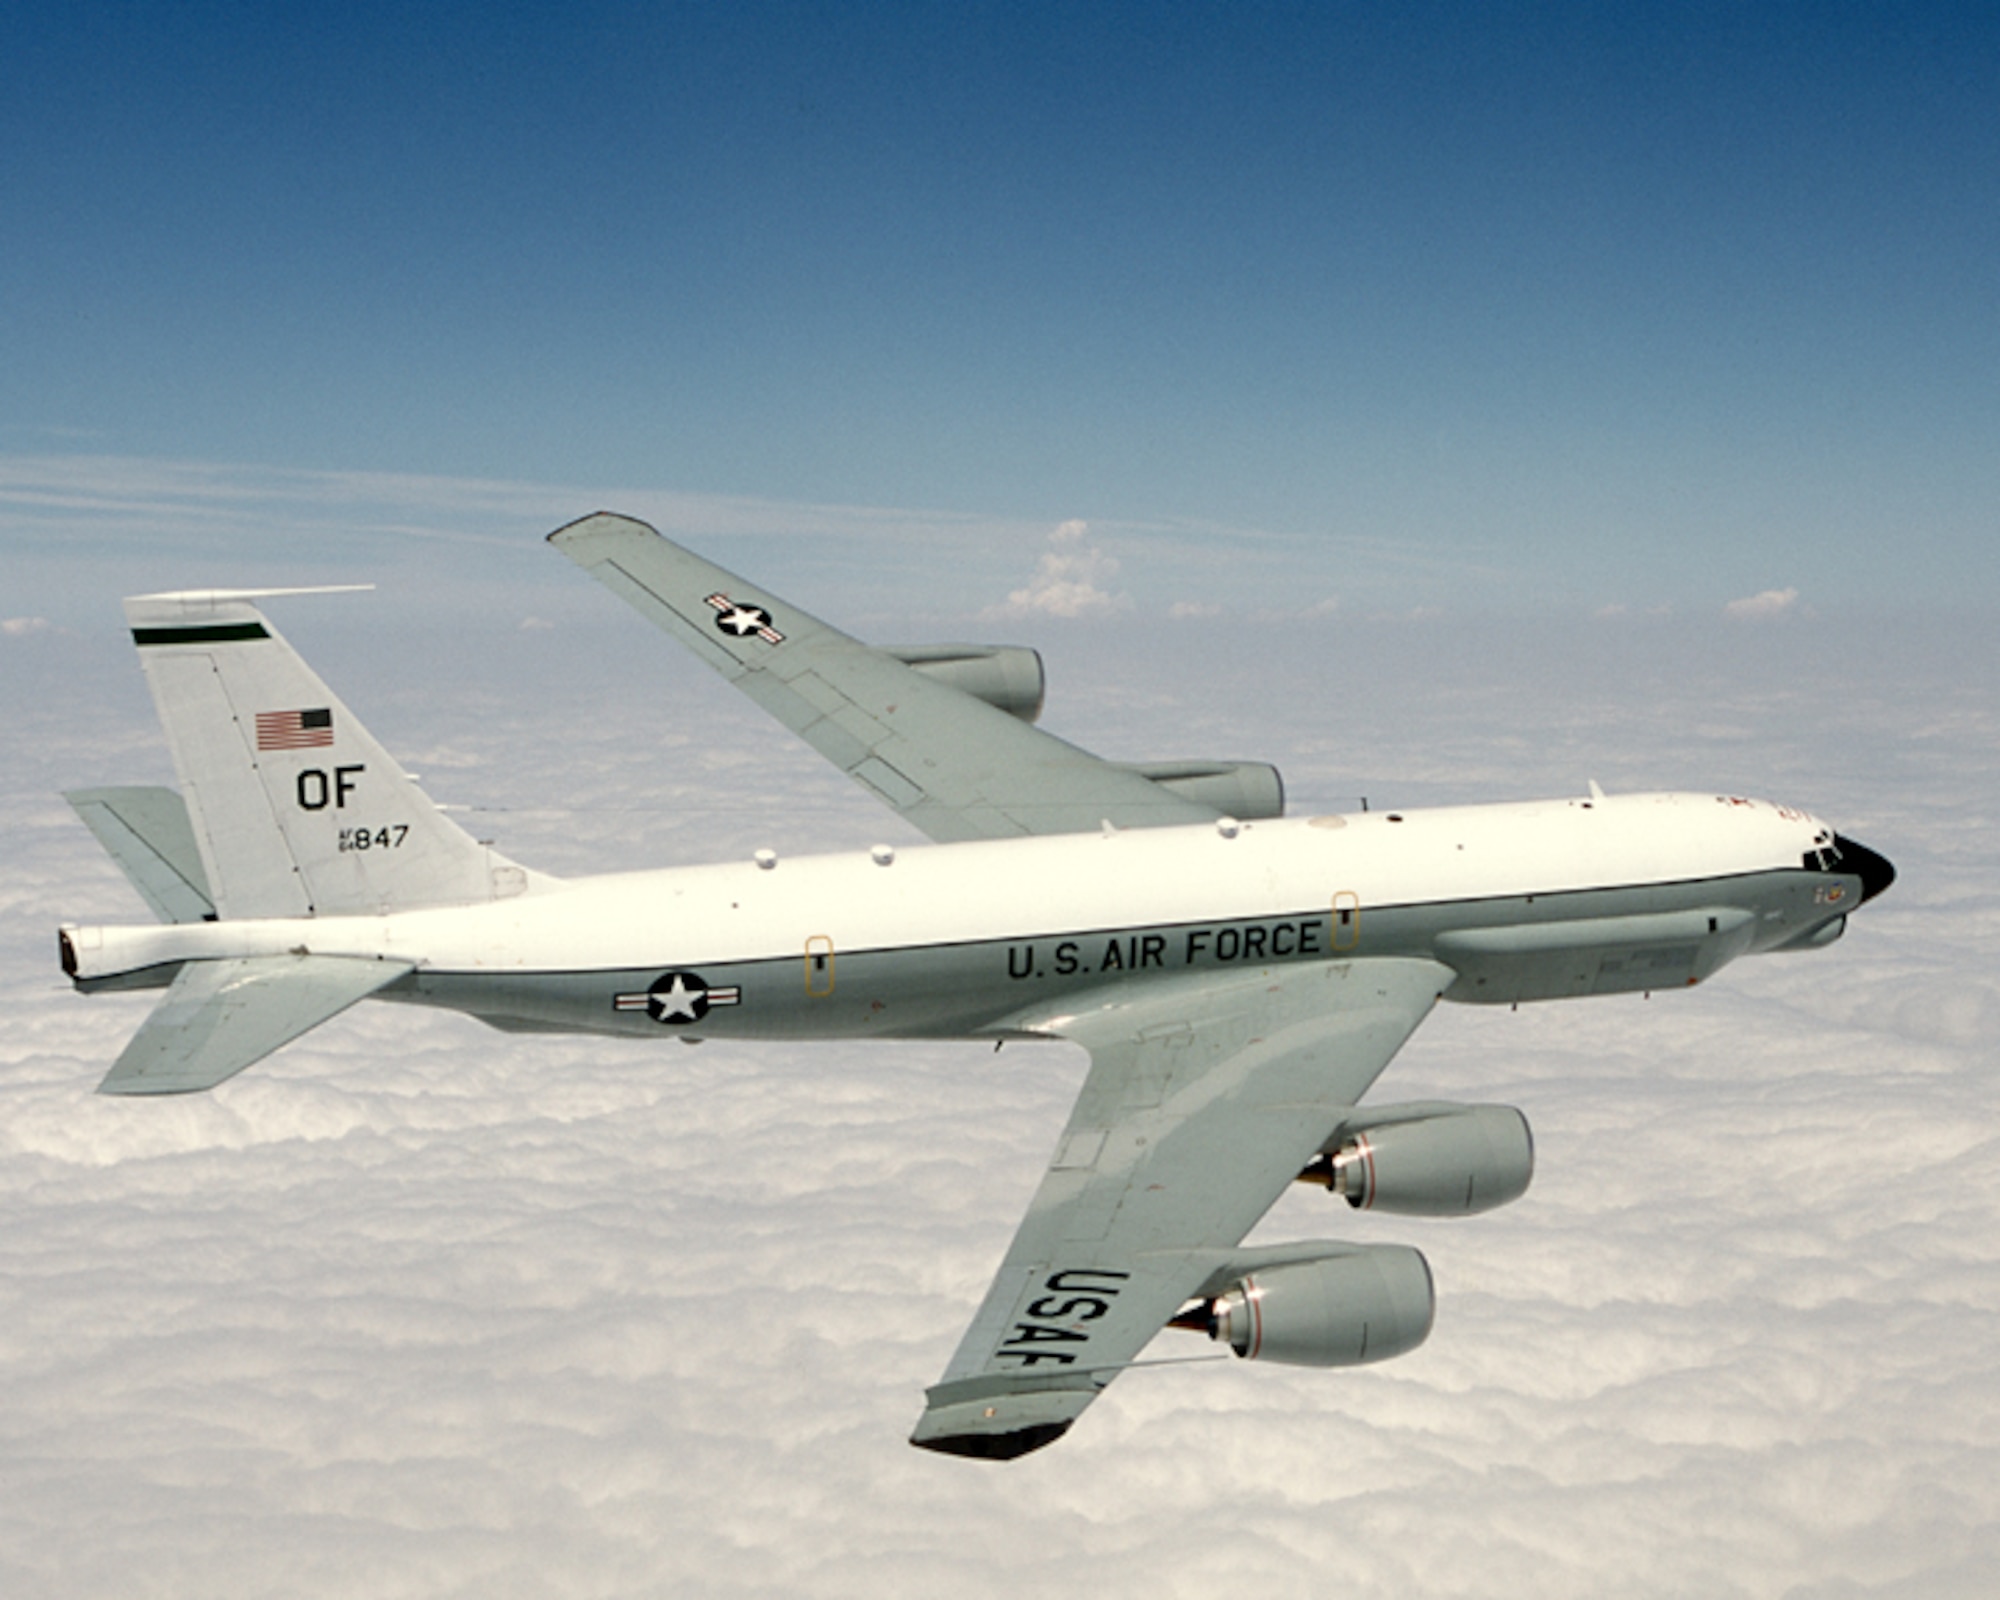 OVER GREENVILLE, Texas -- An RC-135U Combat Sent aircraft flies a training mission from Offutt Air Force Base, Neb. There are only two Combat Sent aircraft in the Air Force inventory and both are assigned to the 55th Wing at Offutt AFB.